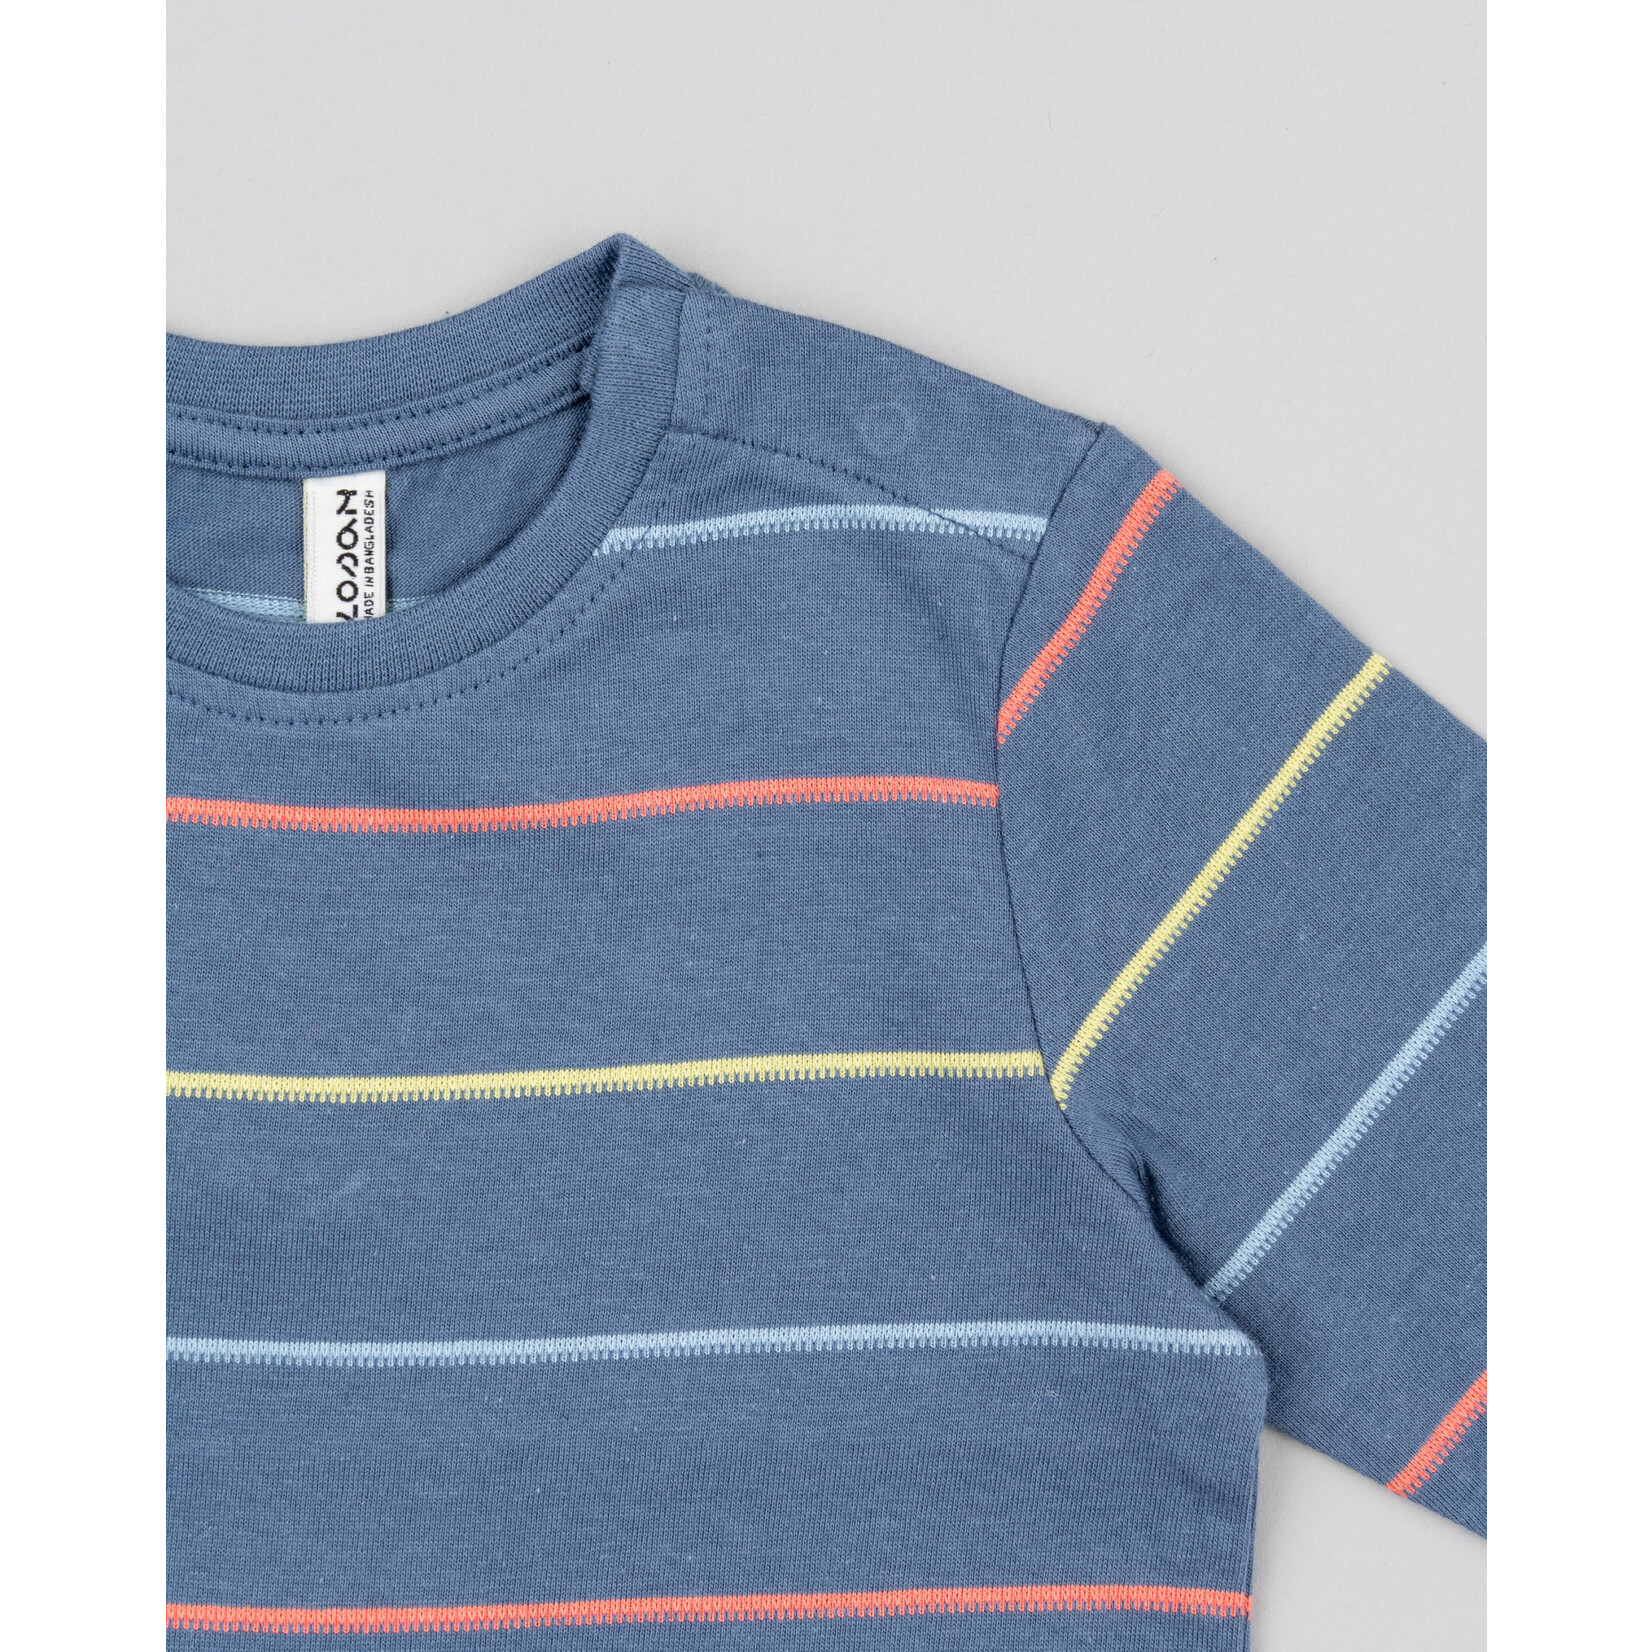 Losan LOSAN - Navy long-sleeved t-shirt with colored lines 'Urban monsters'